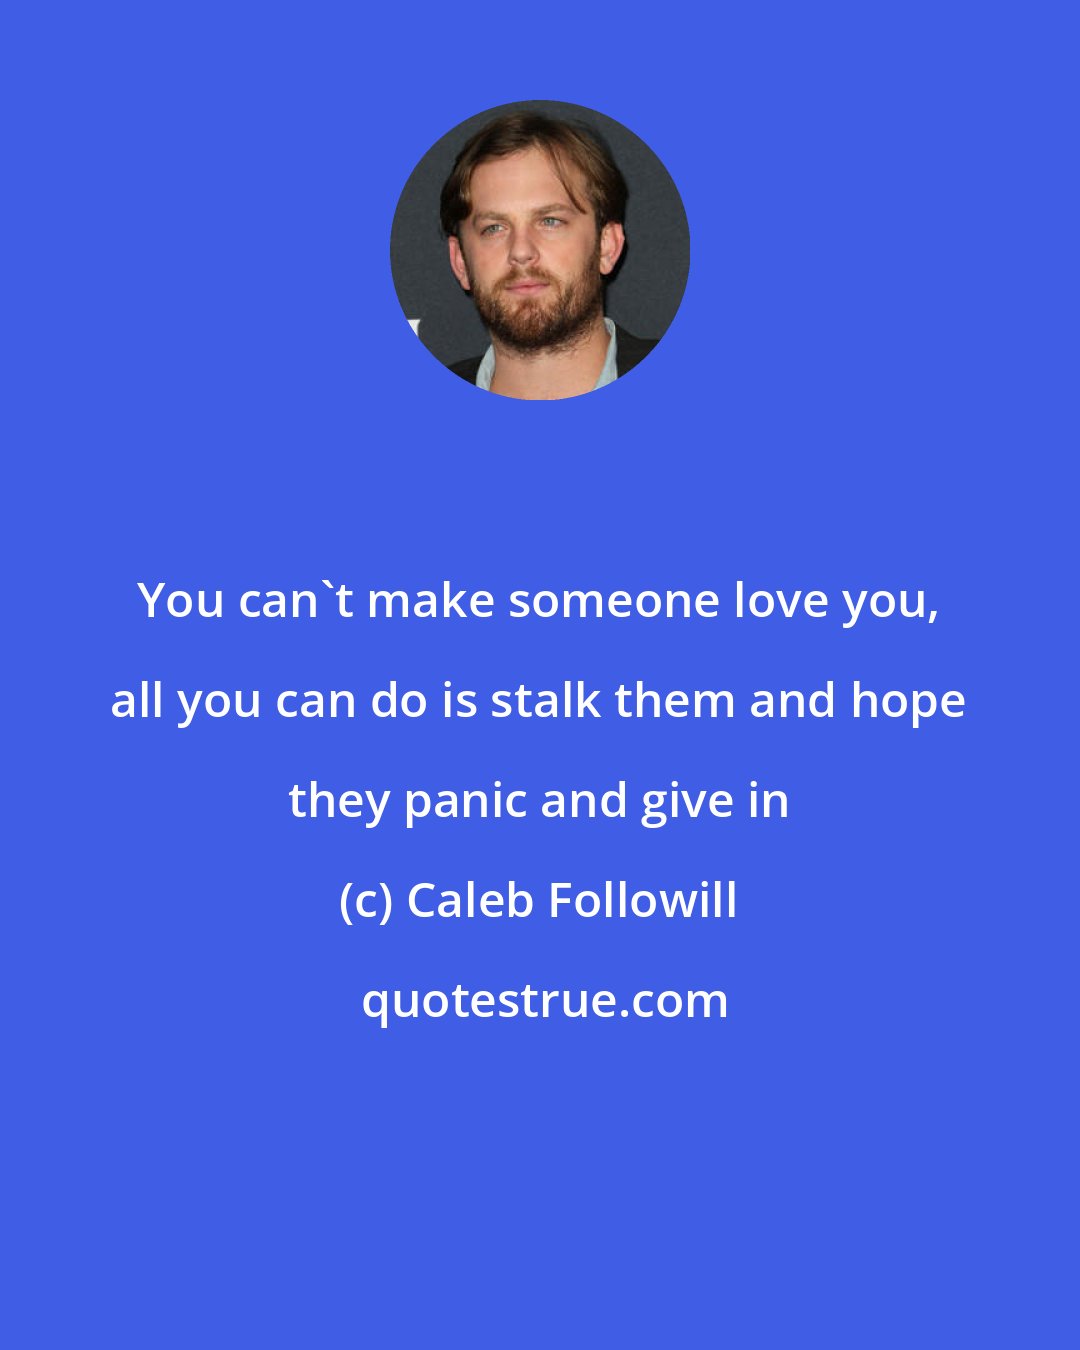 Caleb Followill: You can't make someone love you, all you can do is stalk them and hope they panic and give in